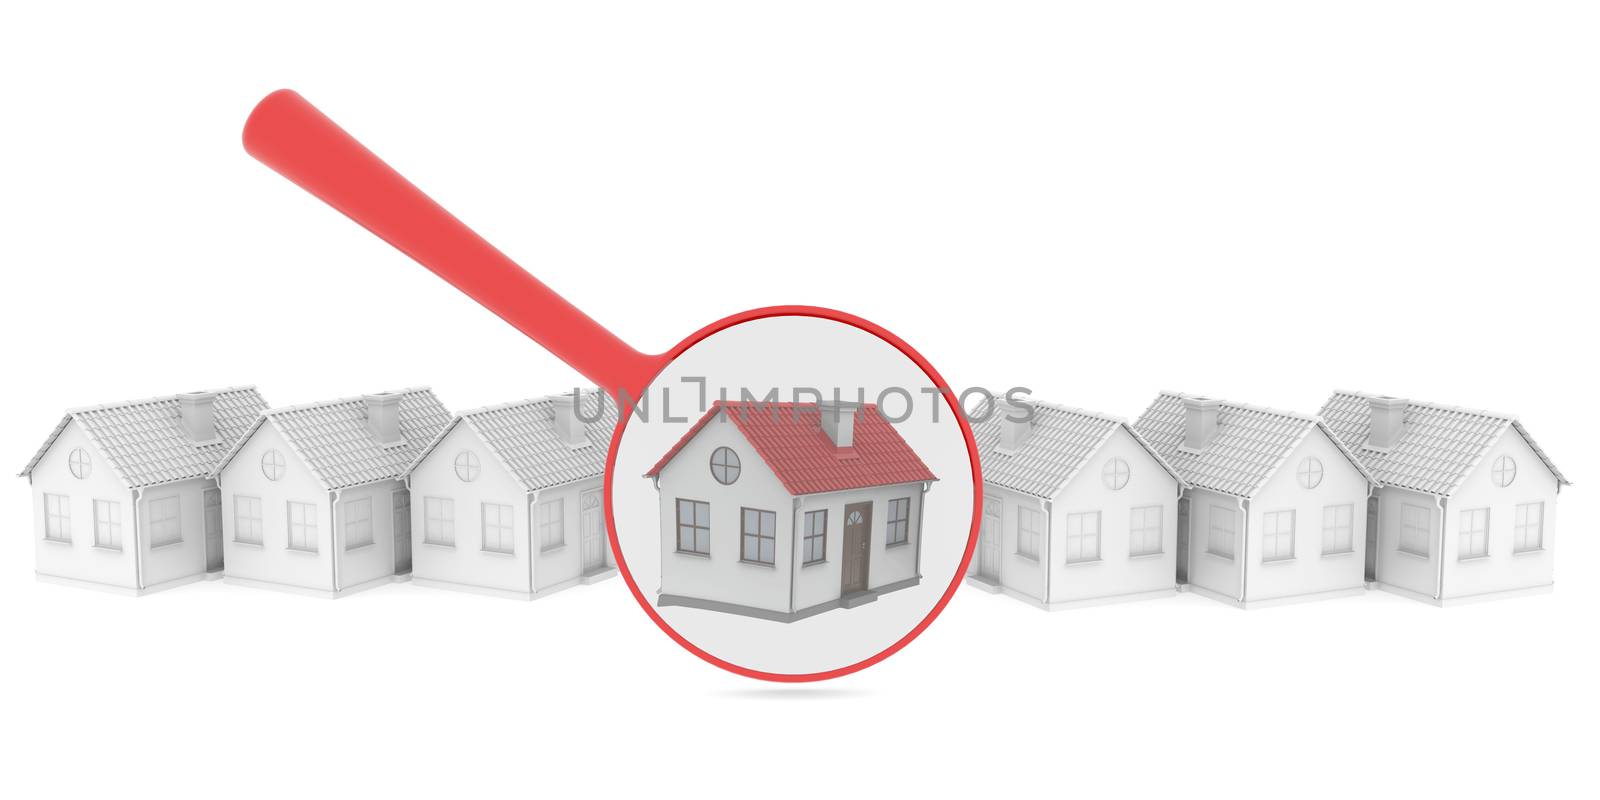 Choosing home. Several houses and a magnifying glass. Isolated render on a white background